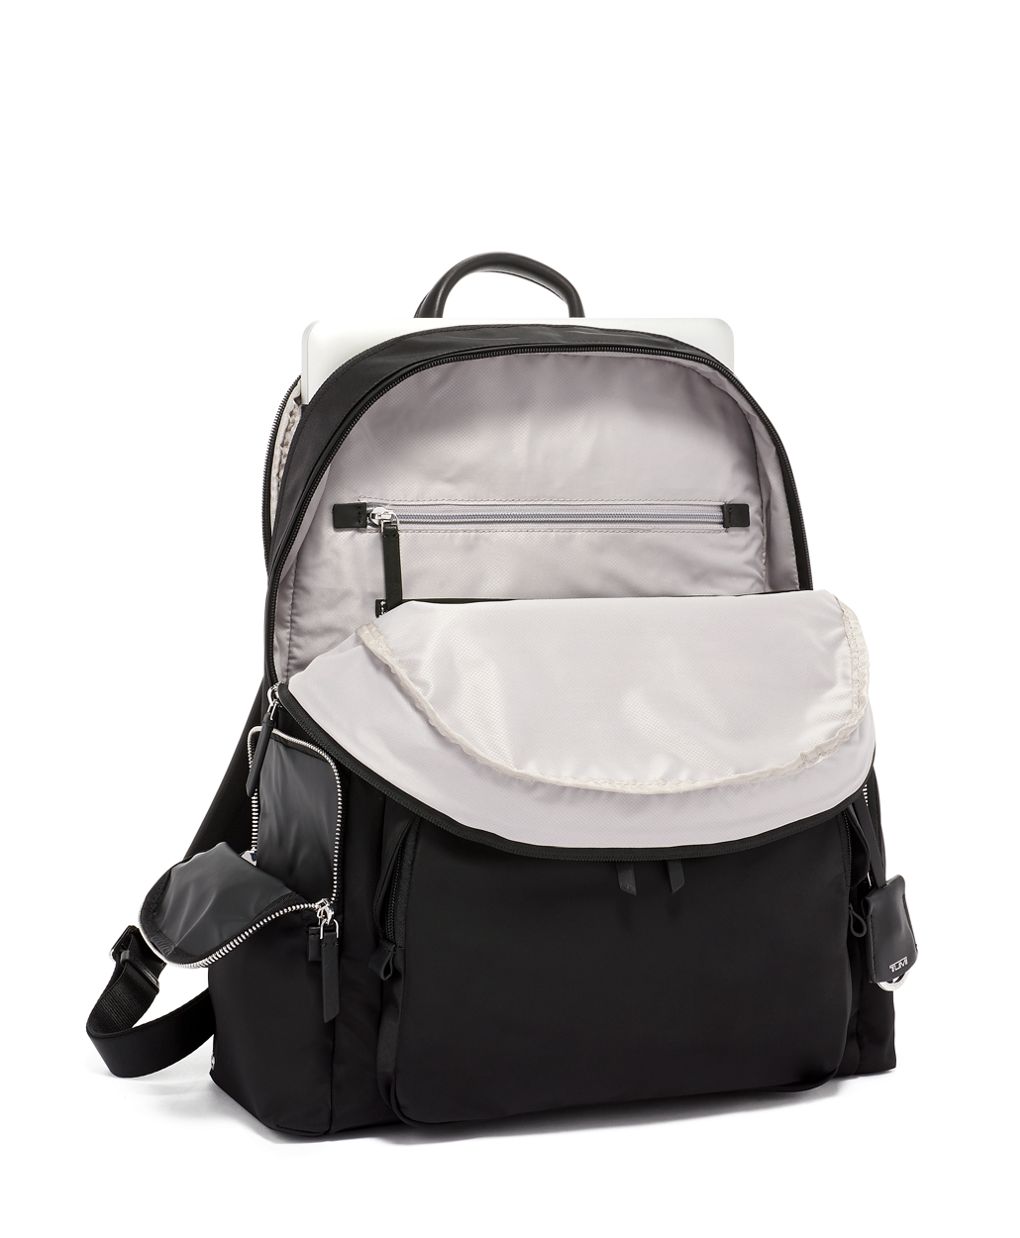 Womens Backpacks Tumi Backpacks - Save 37% Tumi Synthetic Voyageur Carson Backpack in Black/Silver Black 